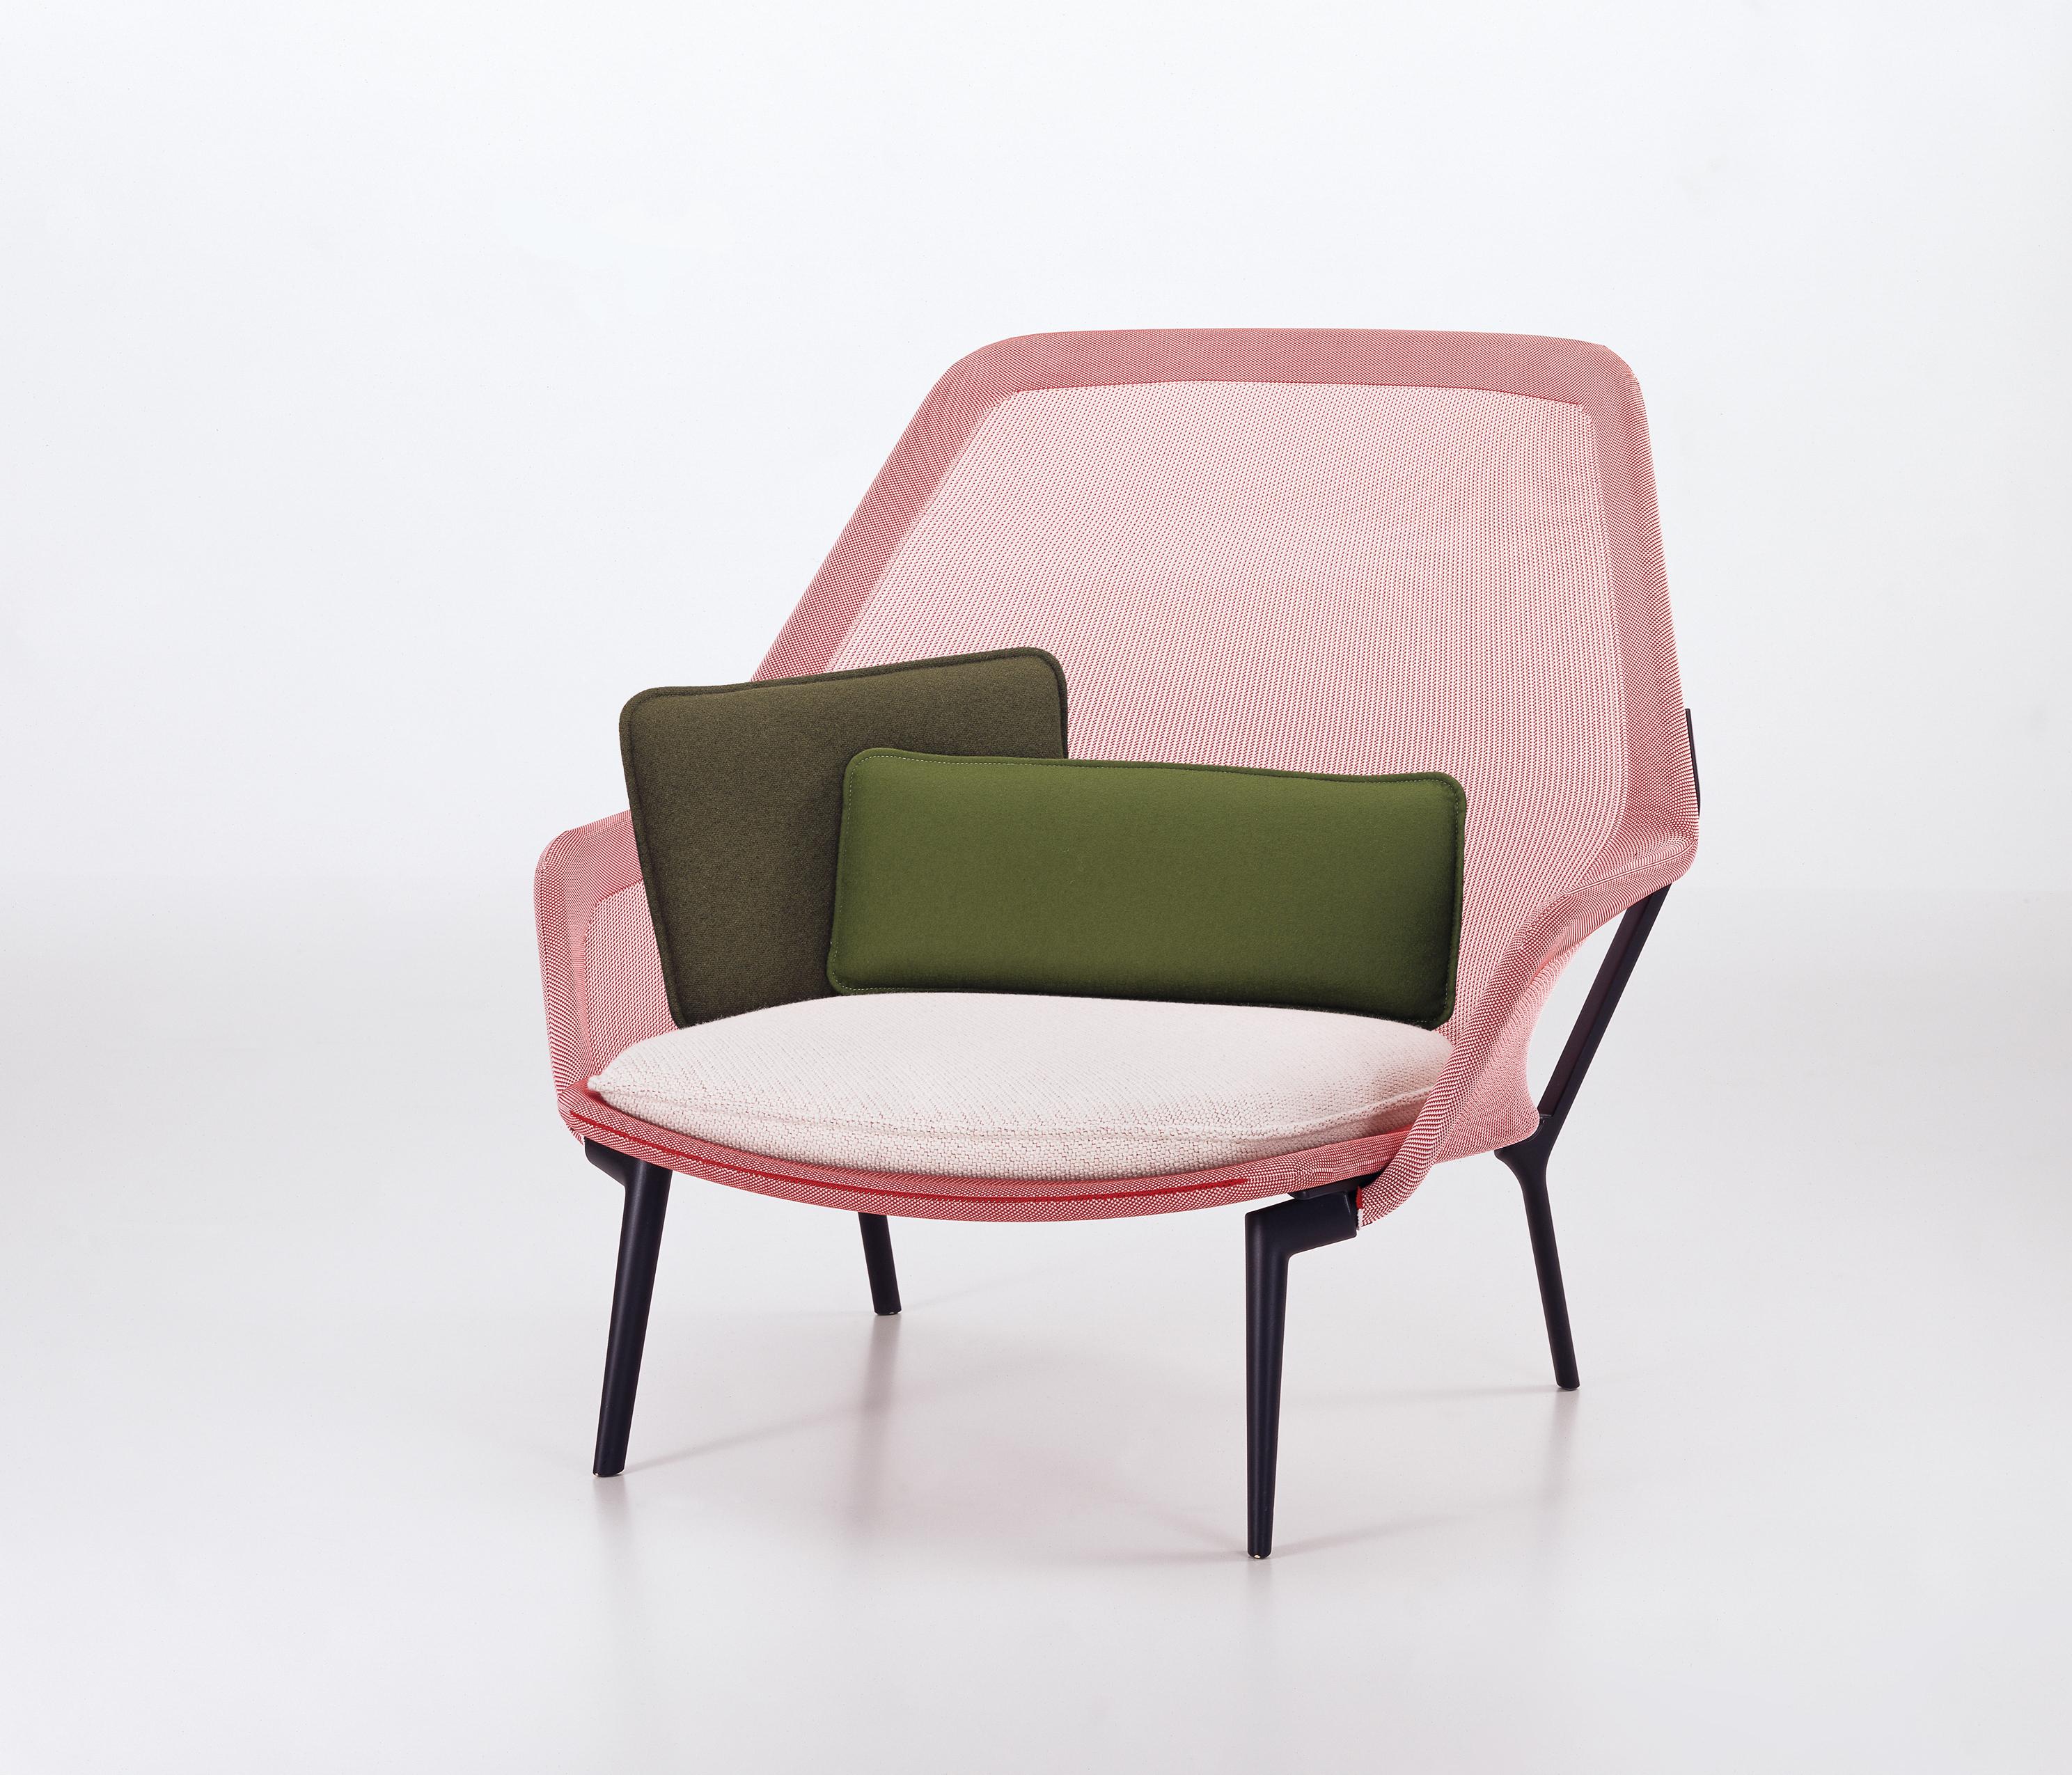 These products are only available in the United States.

Ronan and Erwan Bouroullec created this expansive armchair by using an extremely strong, precisely shaped knit which is stretched over the metal frame like a fitted stocking. Thanks to the